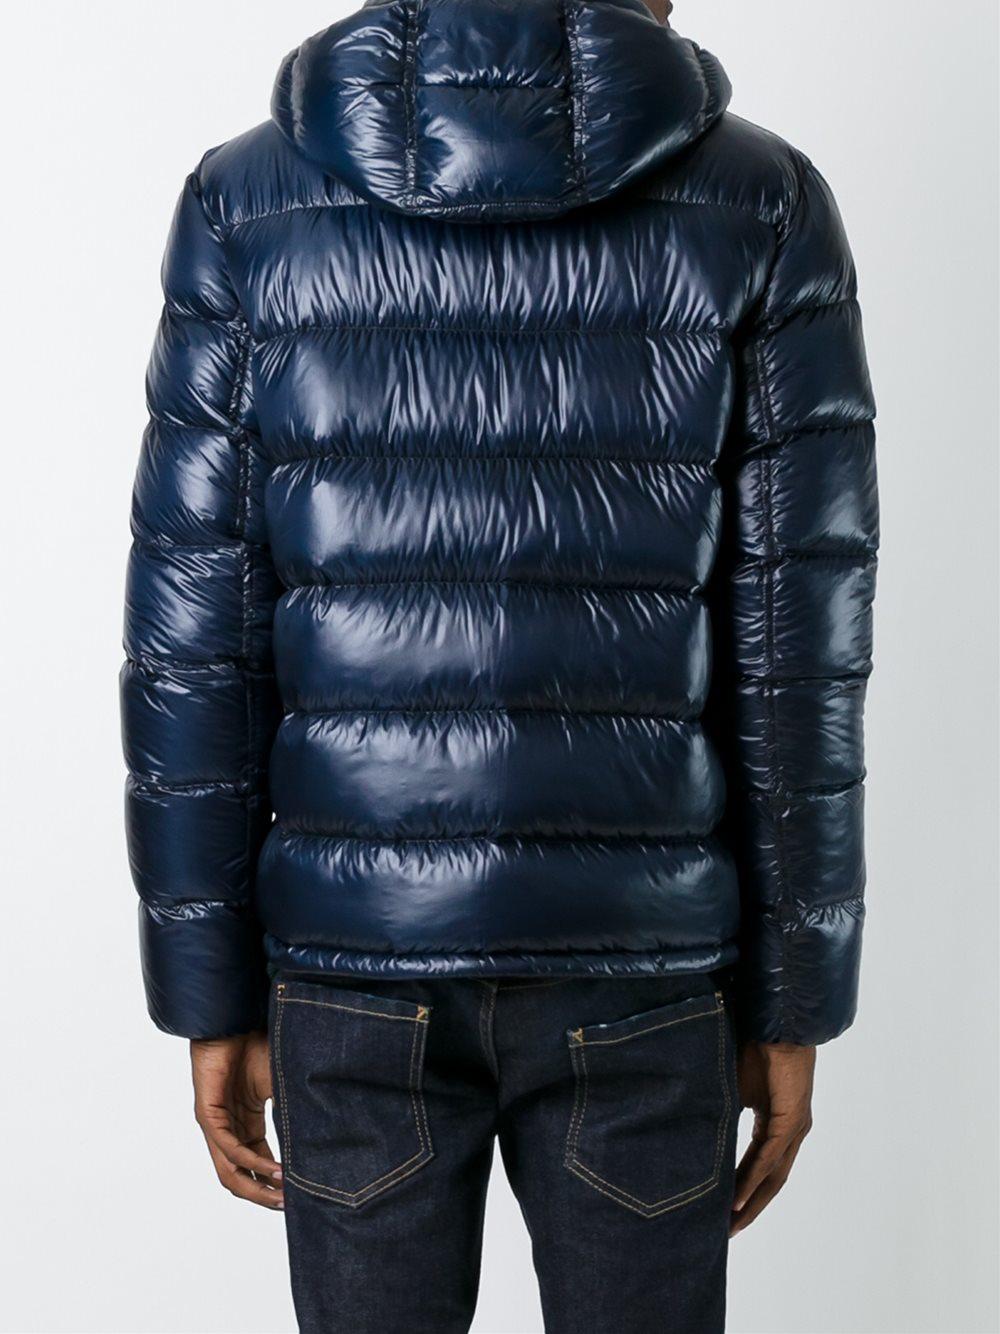 Herno Hooded Padded Jacket in Blue for Men - Lyst